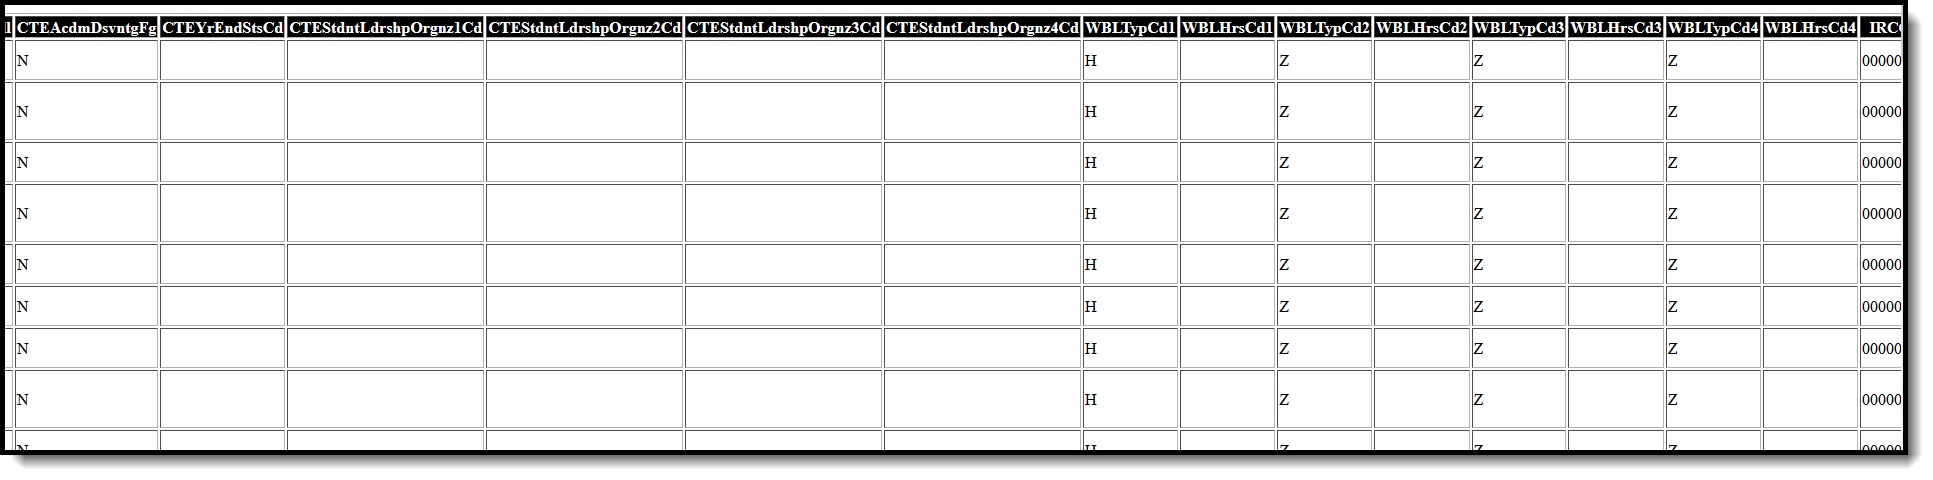 Screenshot of the CTE Student File in HTML Format, starting with the CTE specific fields. 